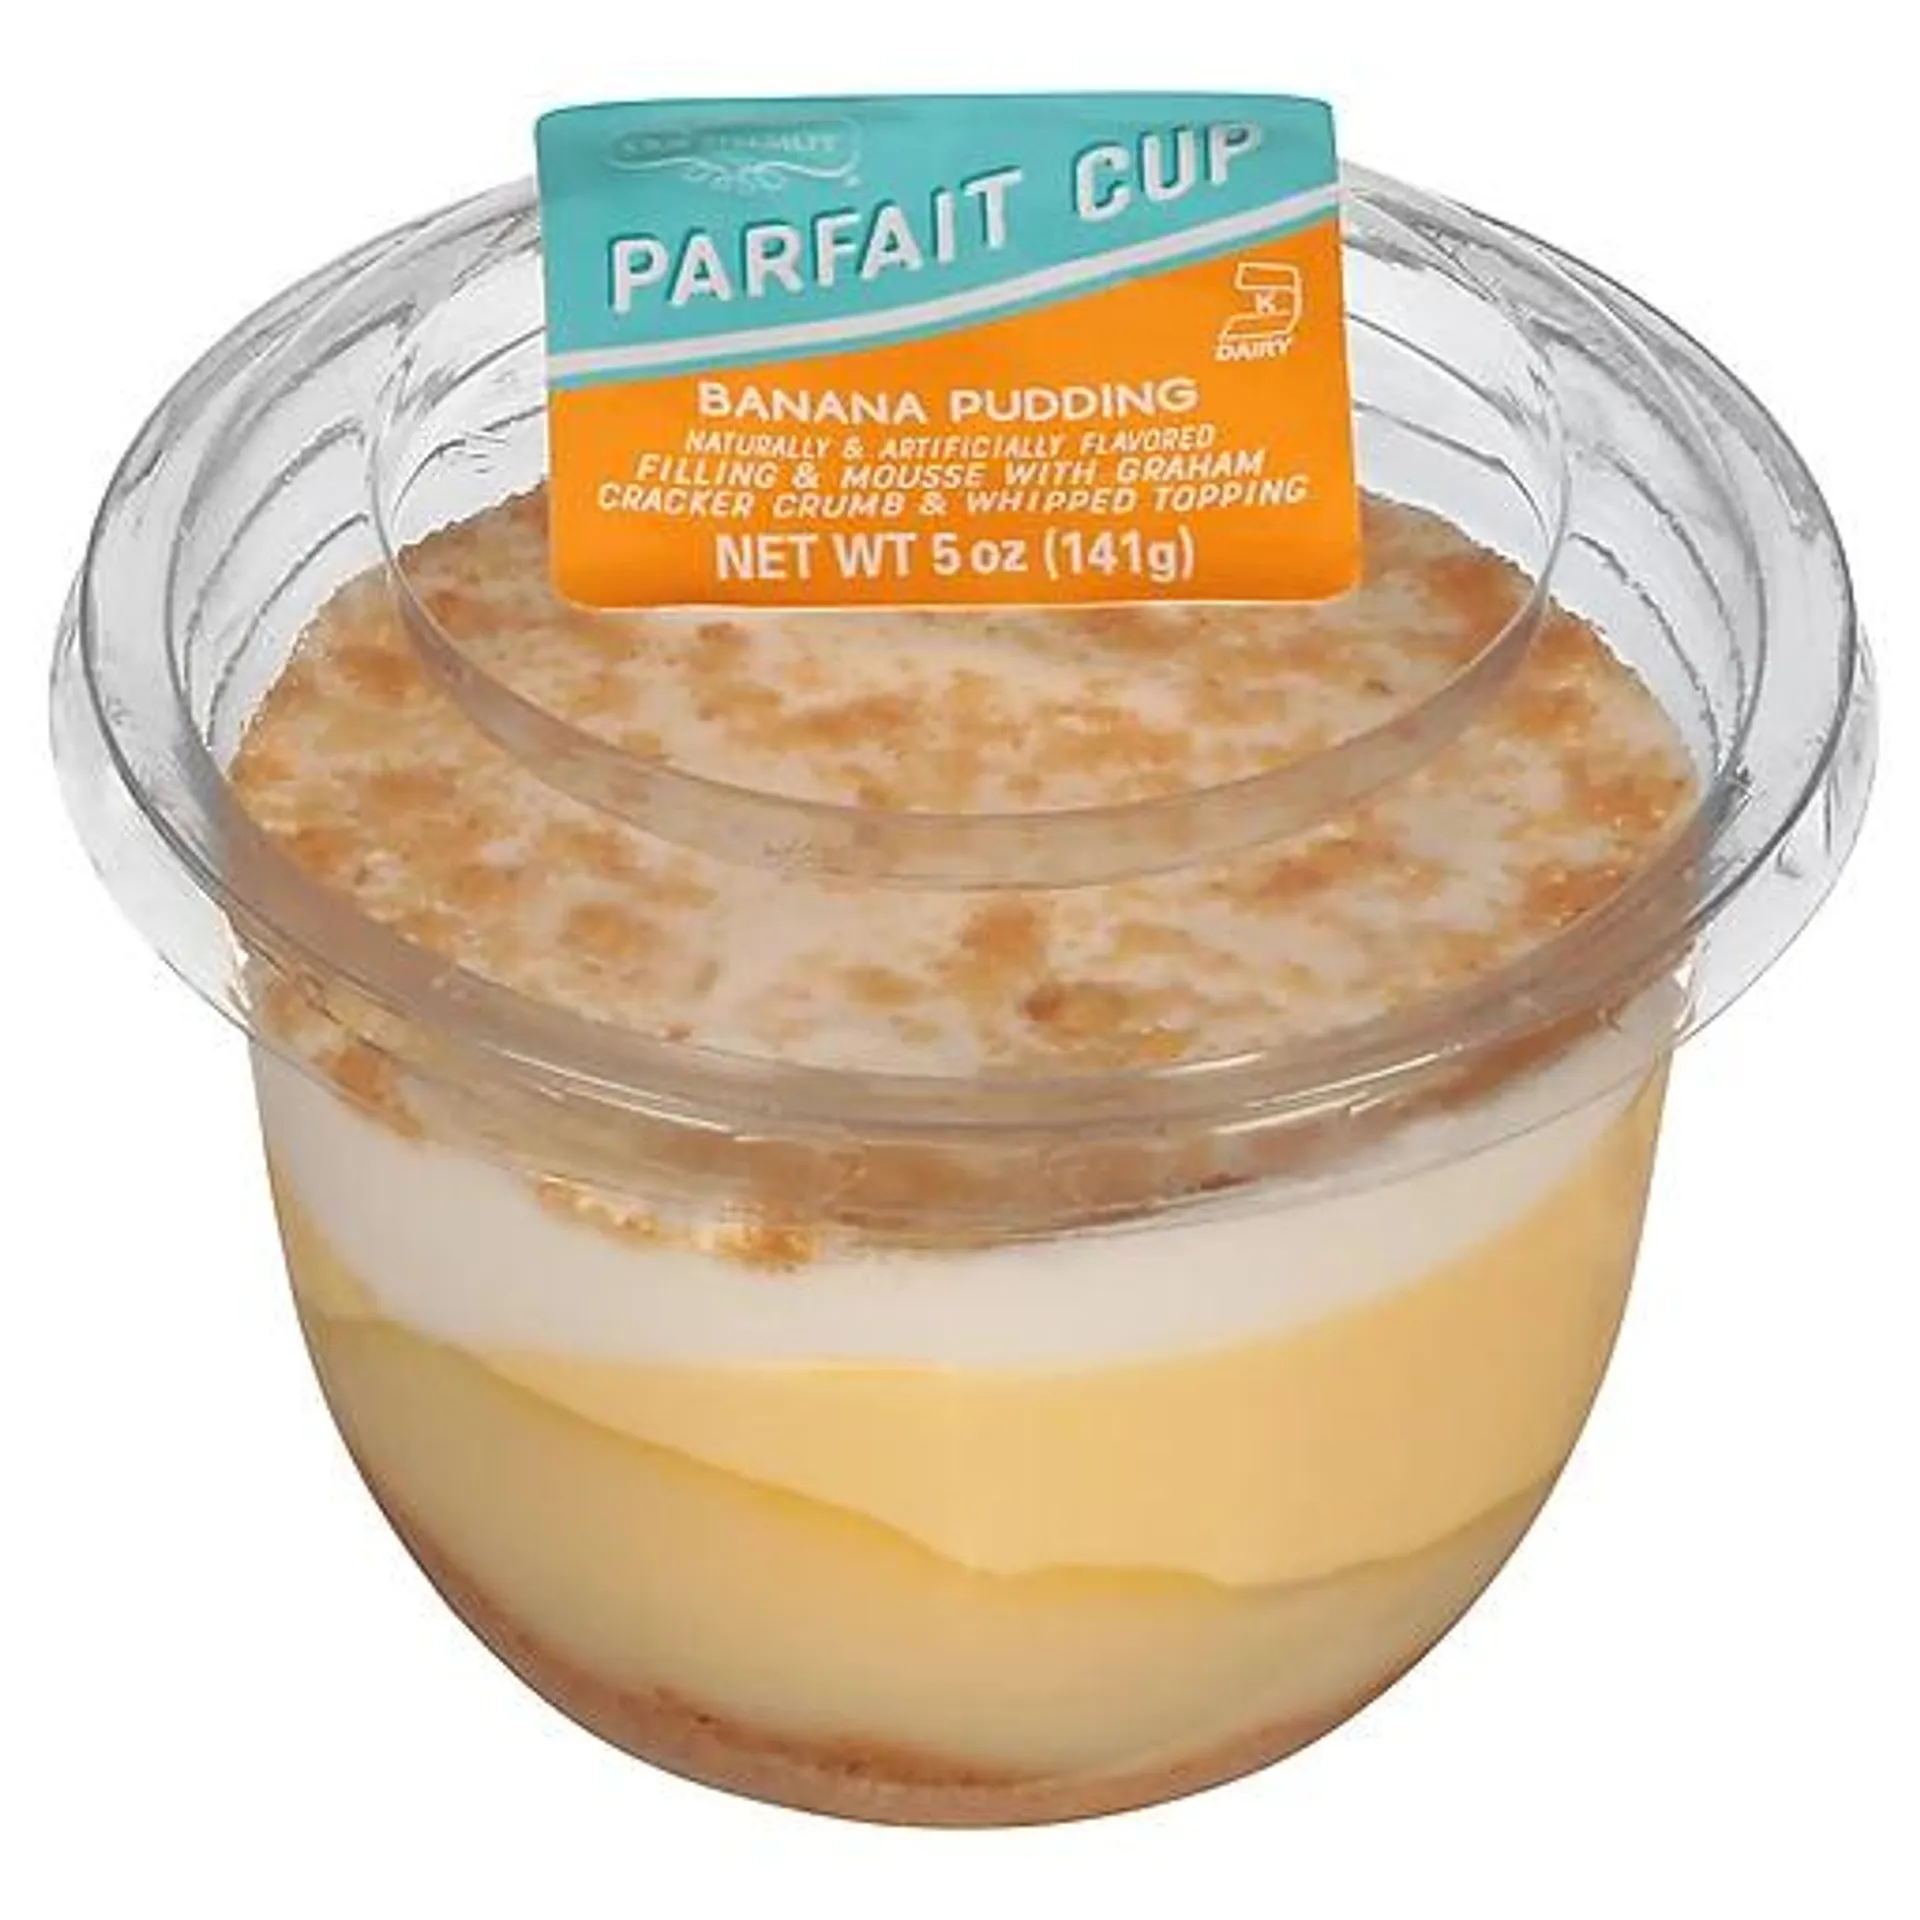 Our Specialty Parfait Cup, Banana Pudding 5 Oz